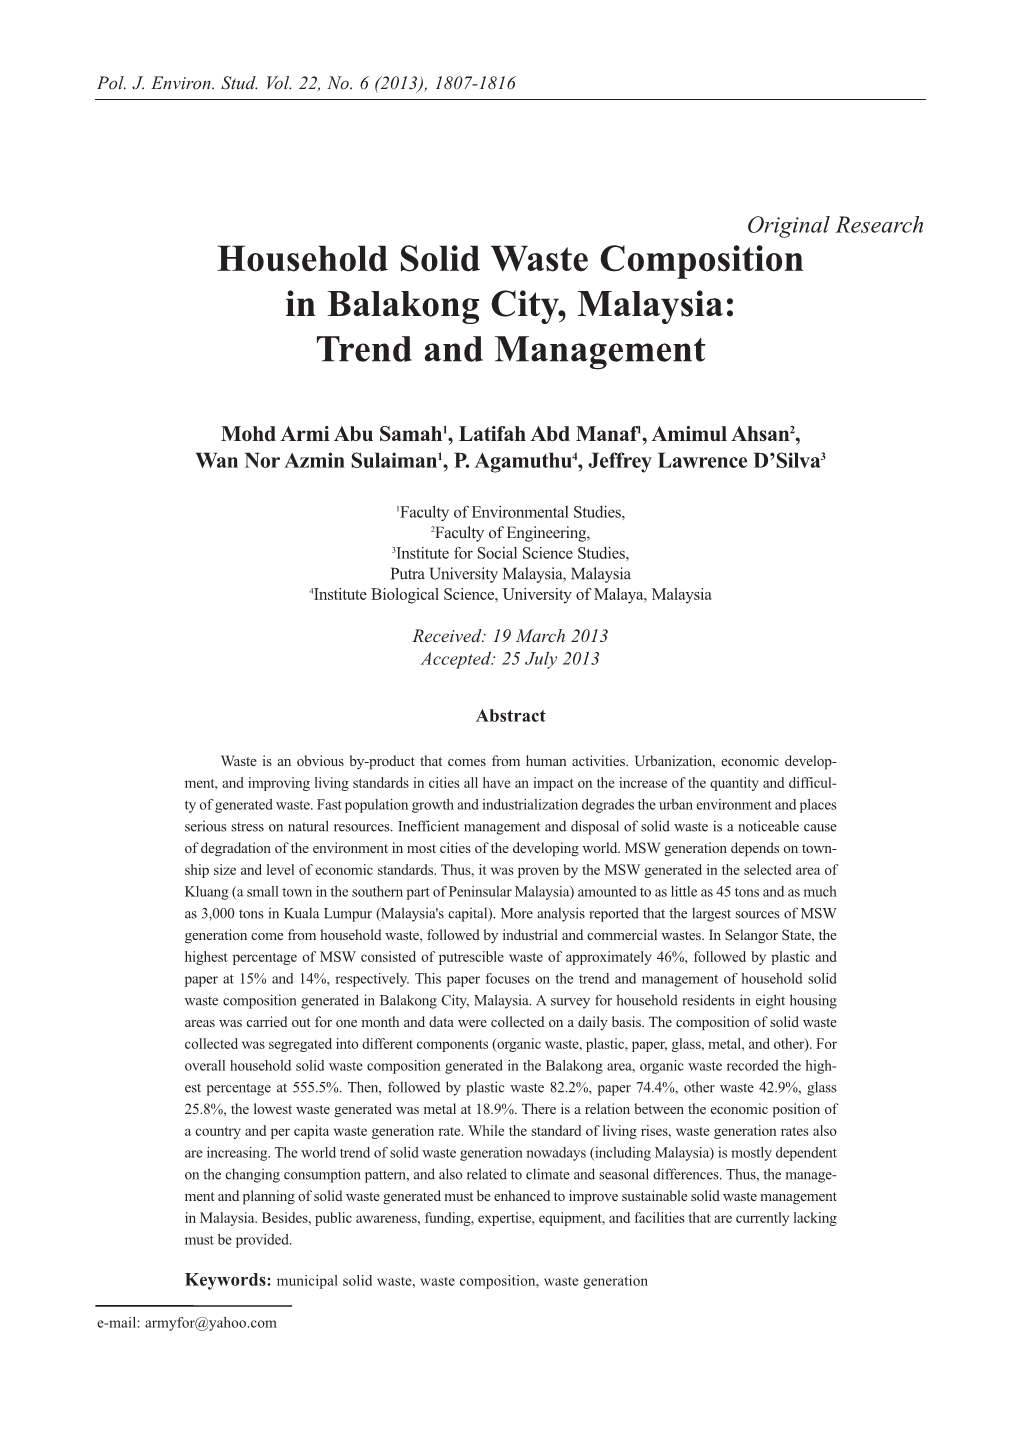 Household Solid Waste Composition in Balakong City, Malaysia: Trend and Management